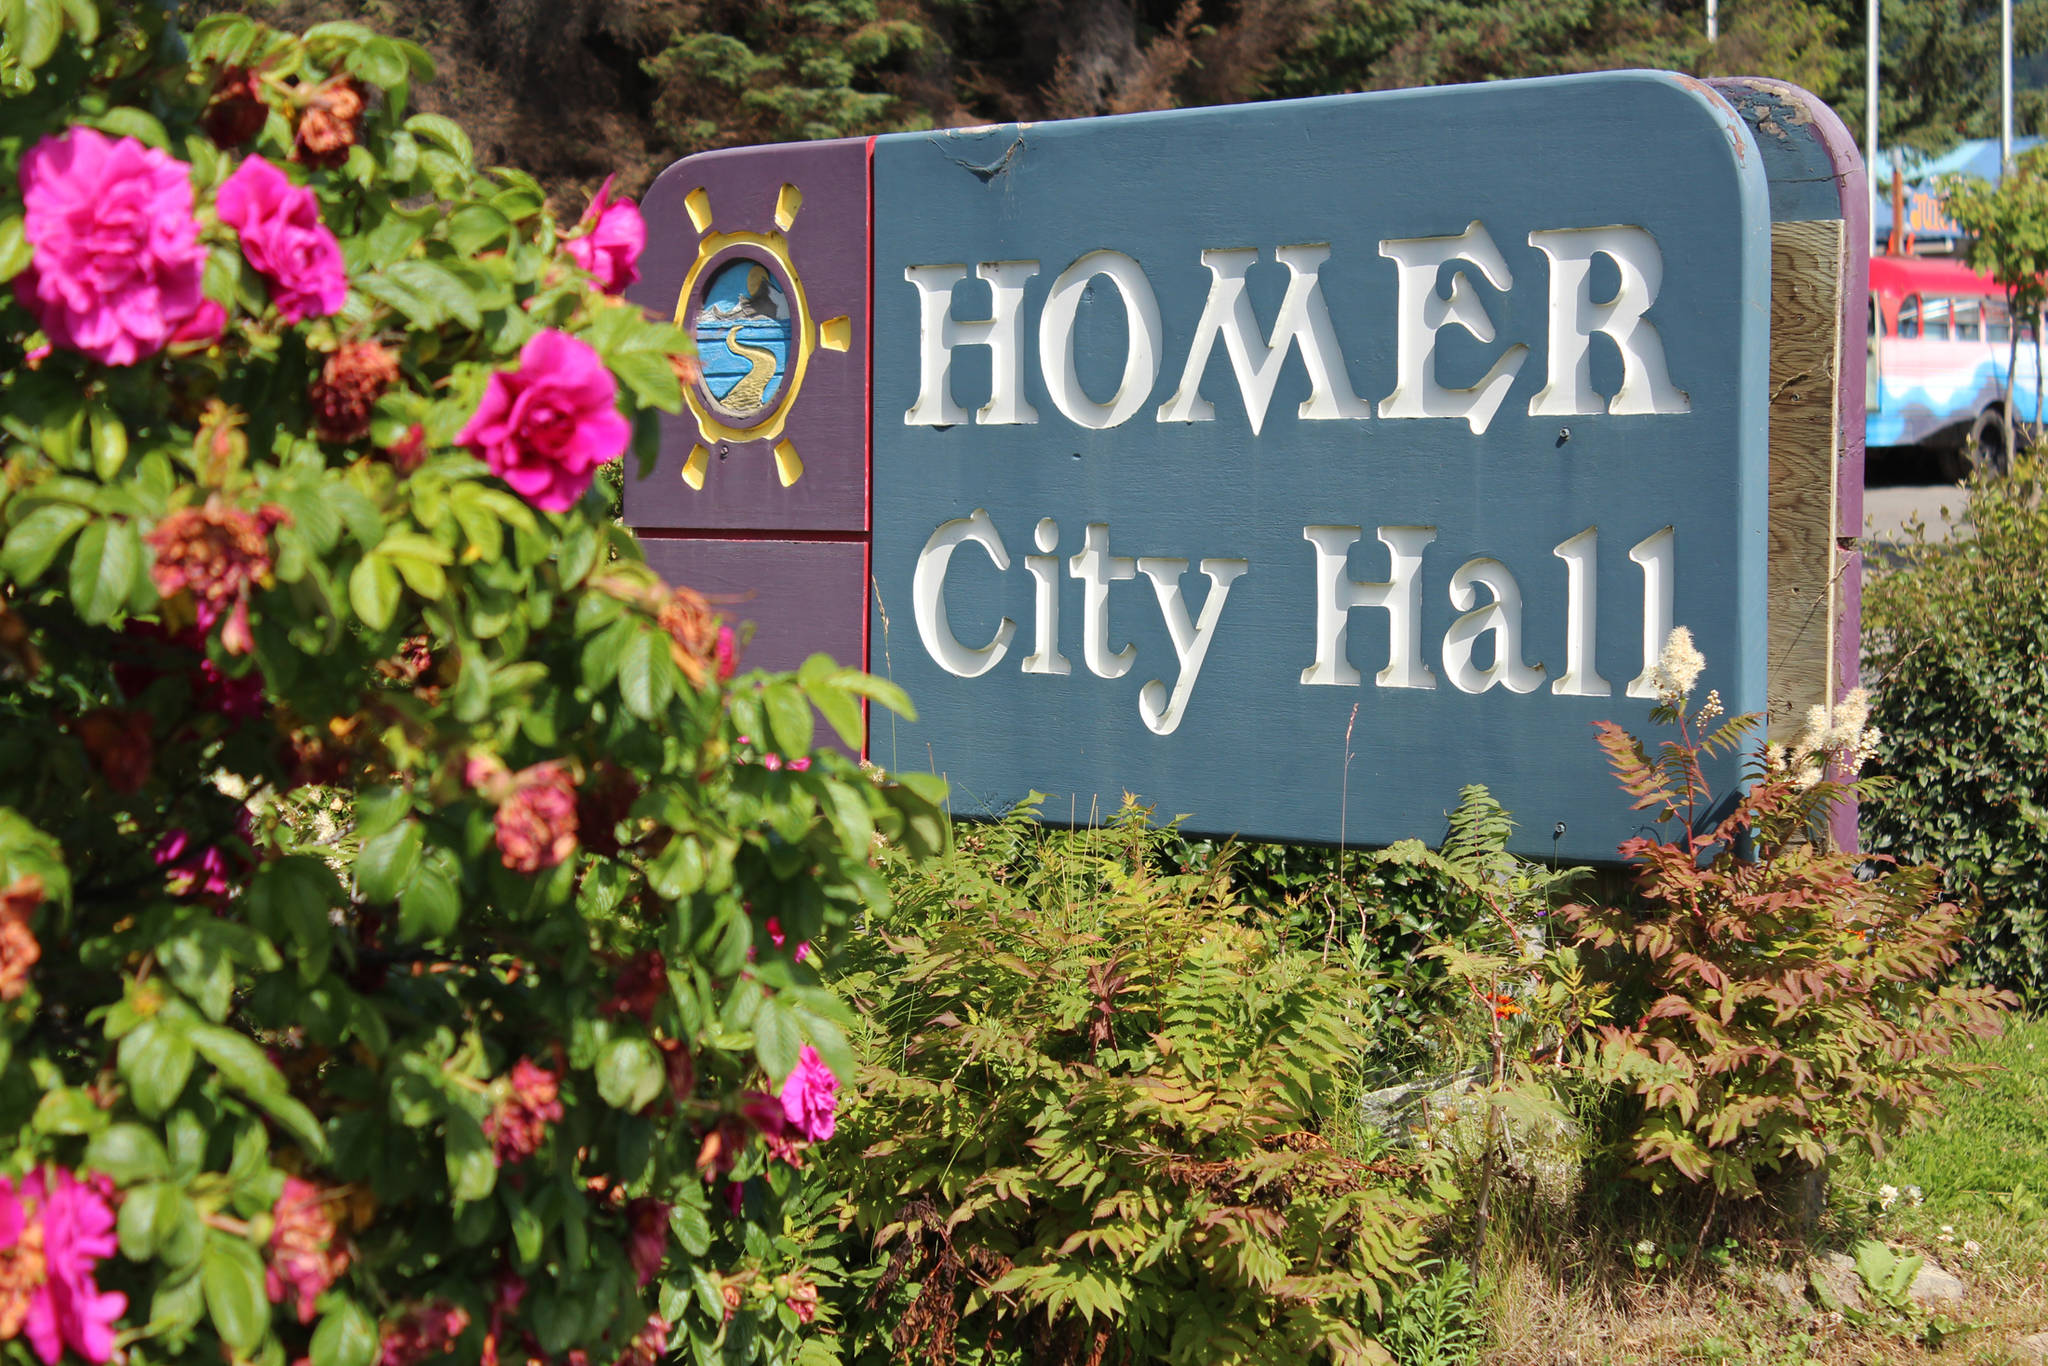 Three things to watch for at the next Homer City Council meeting